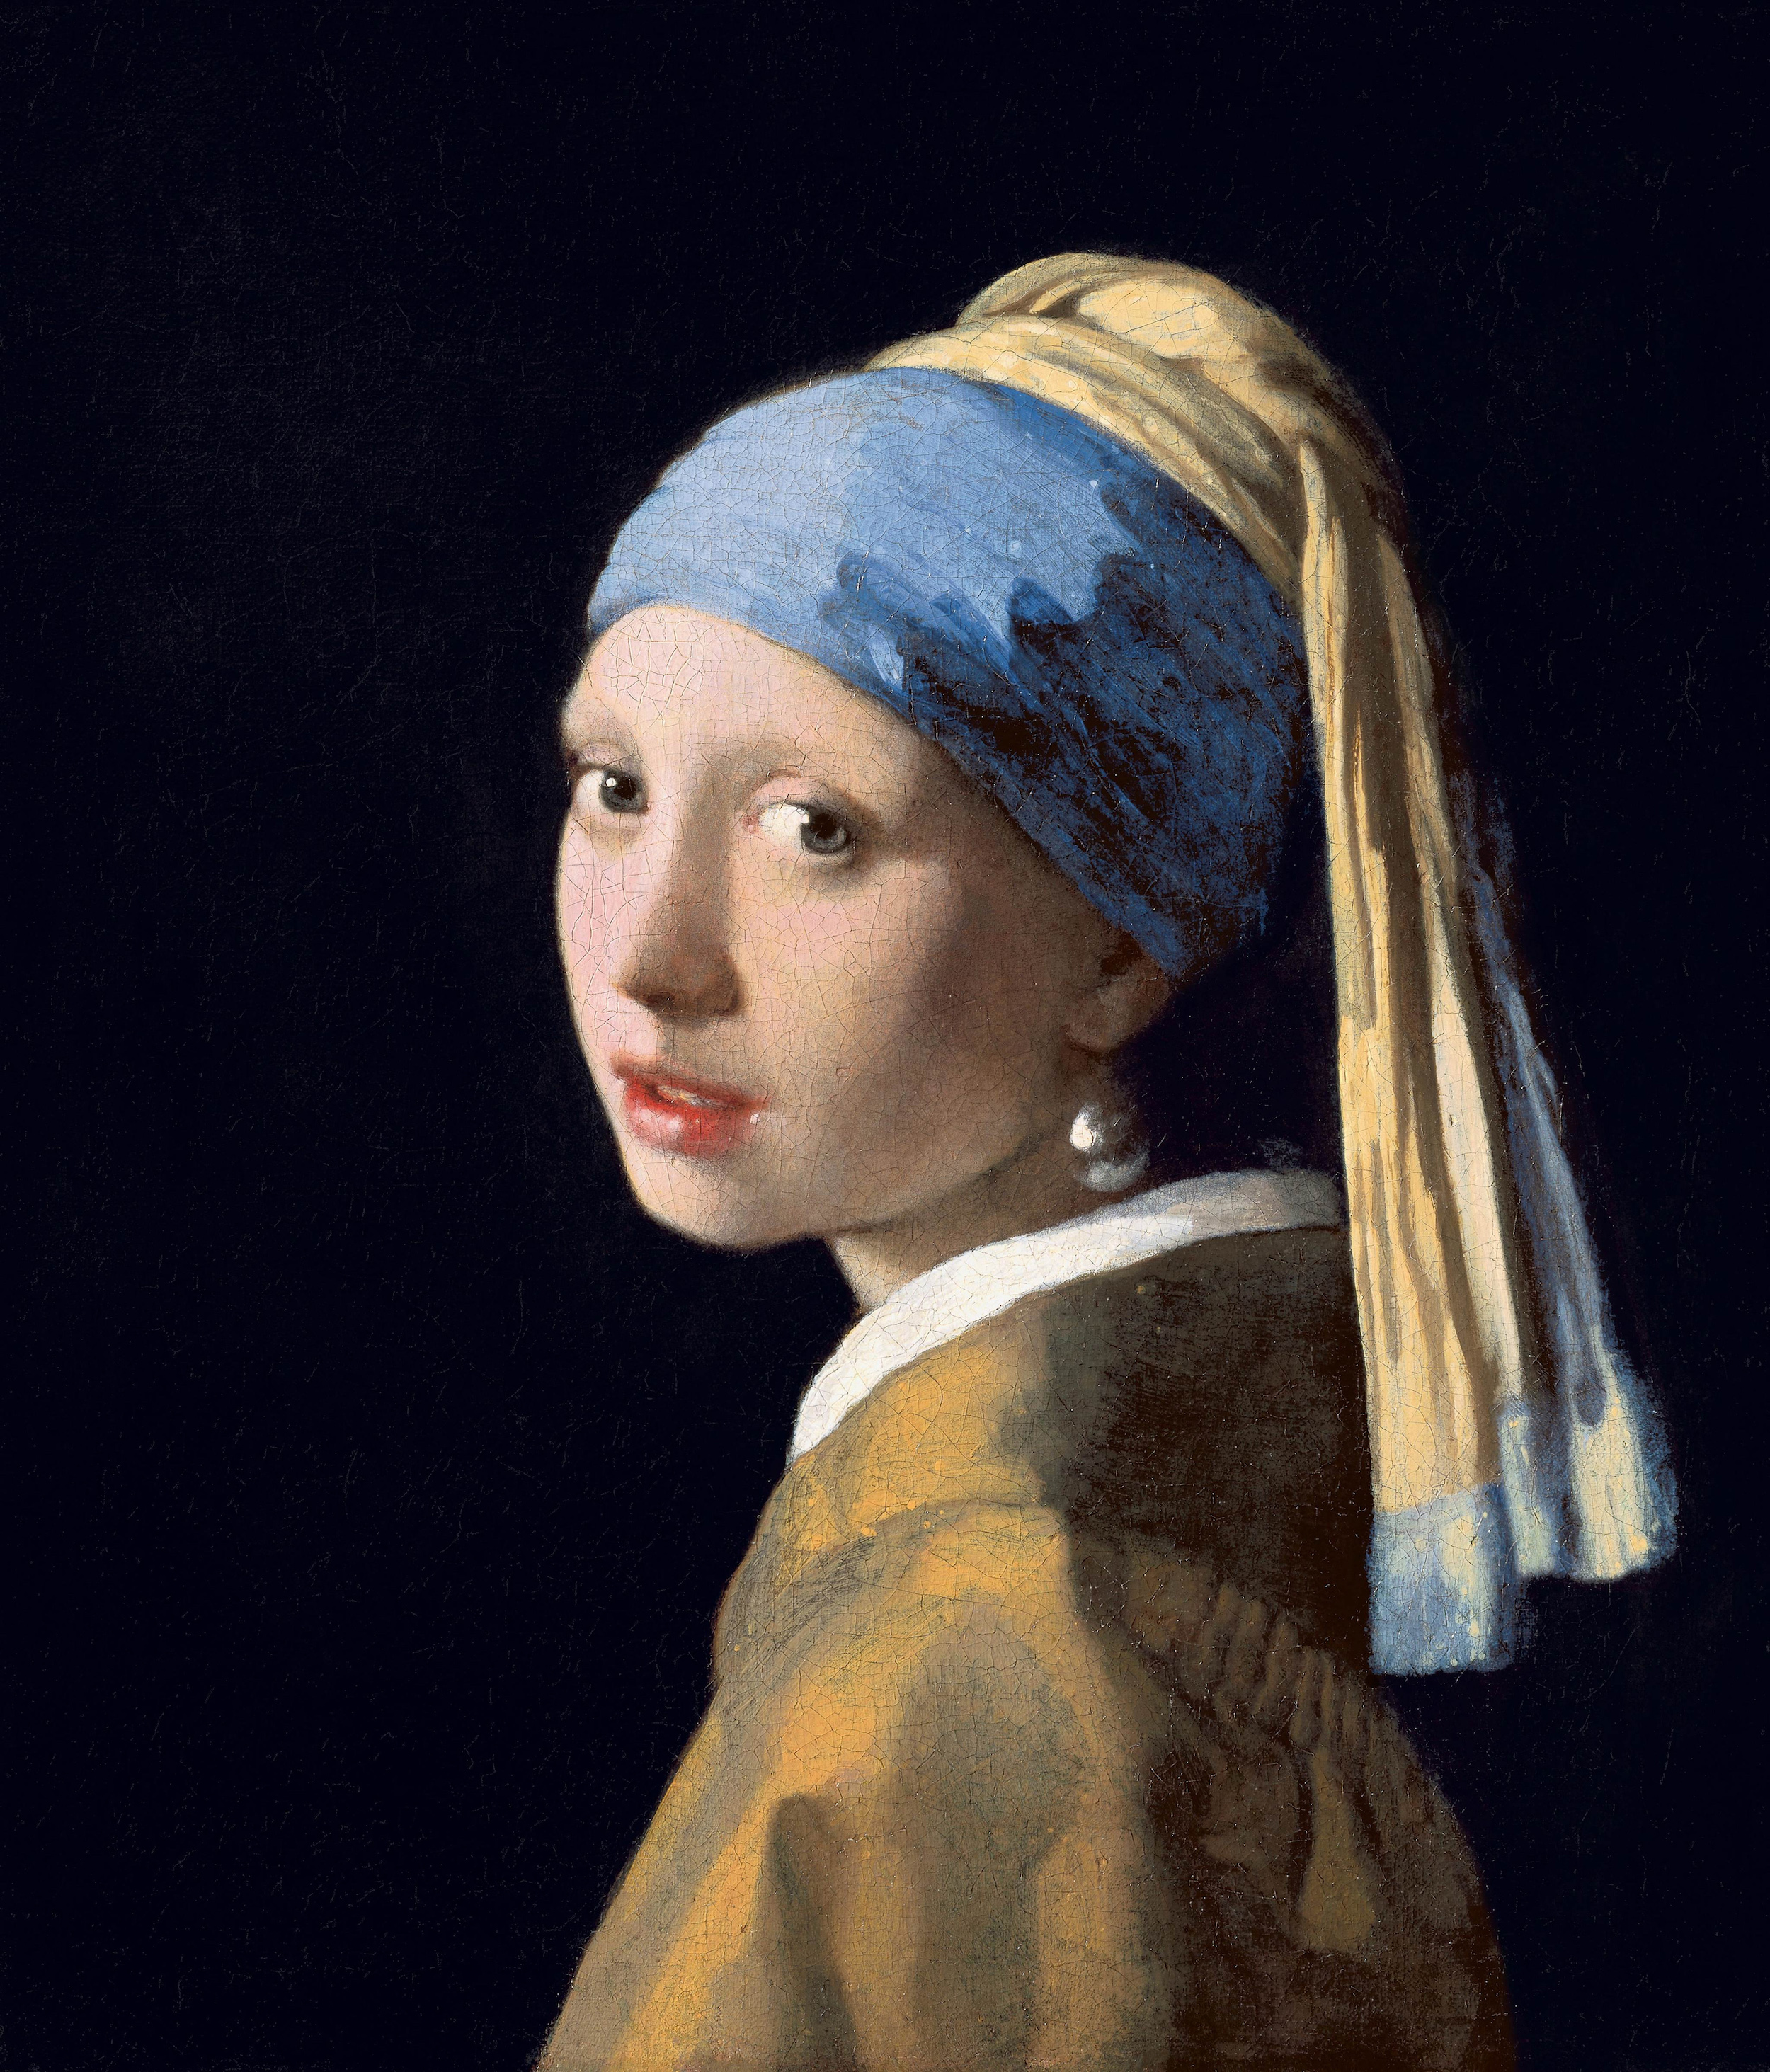 Girl with a Pearl Earring by Johannes Vermeer - 1665 - 44 cm x 39 cm Mauritshuis, The Hague